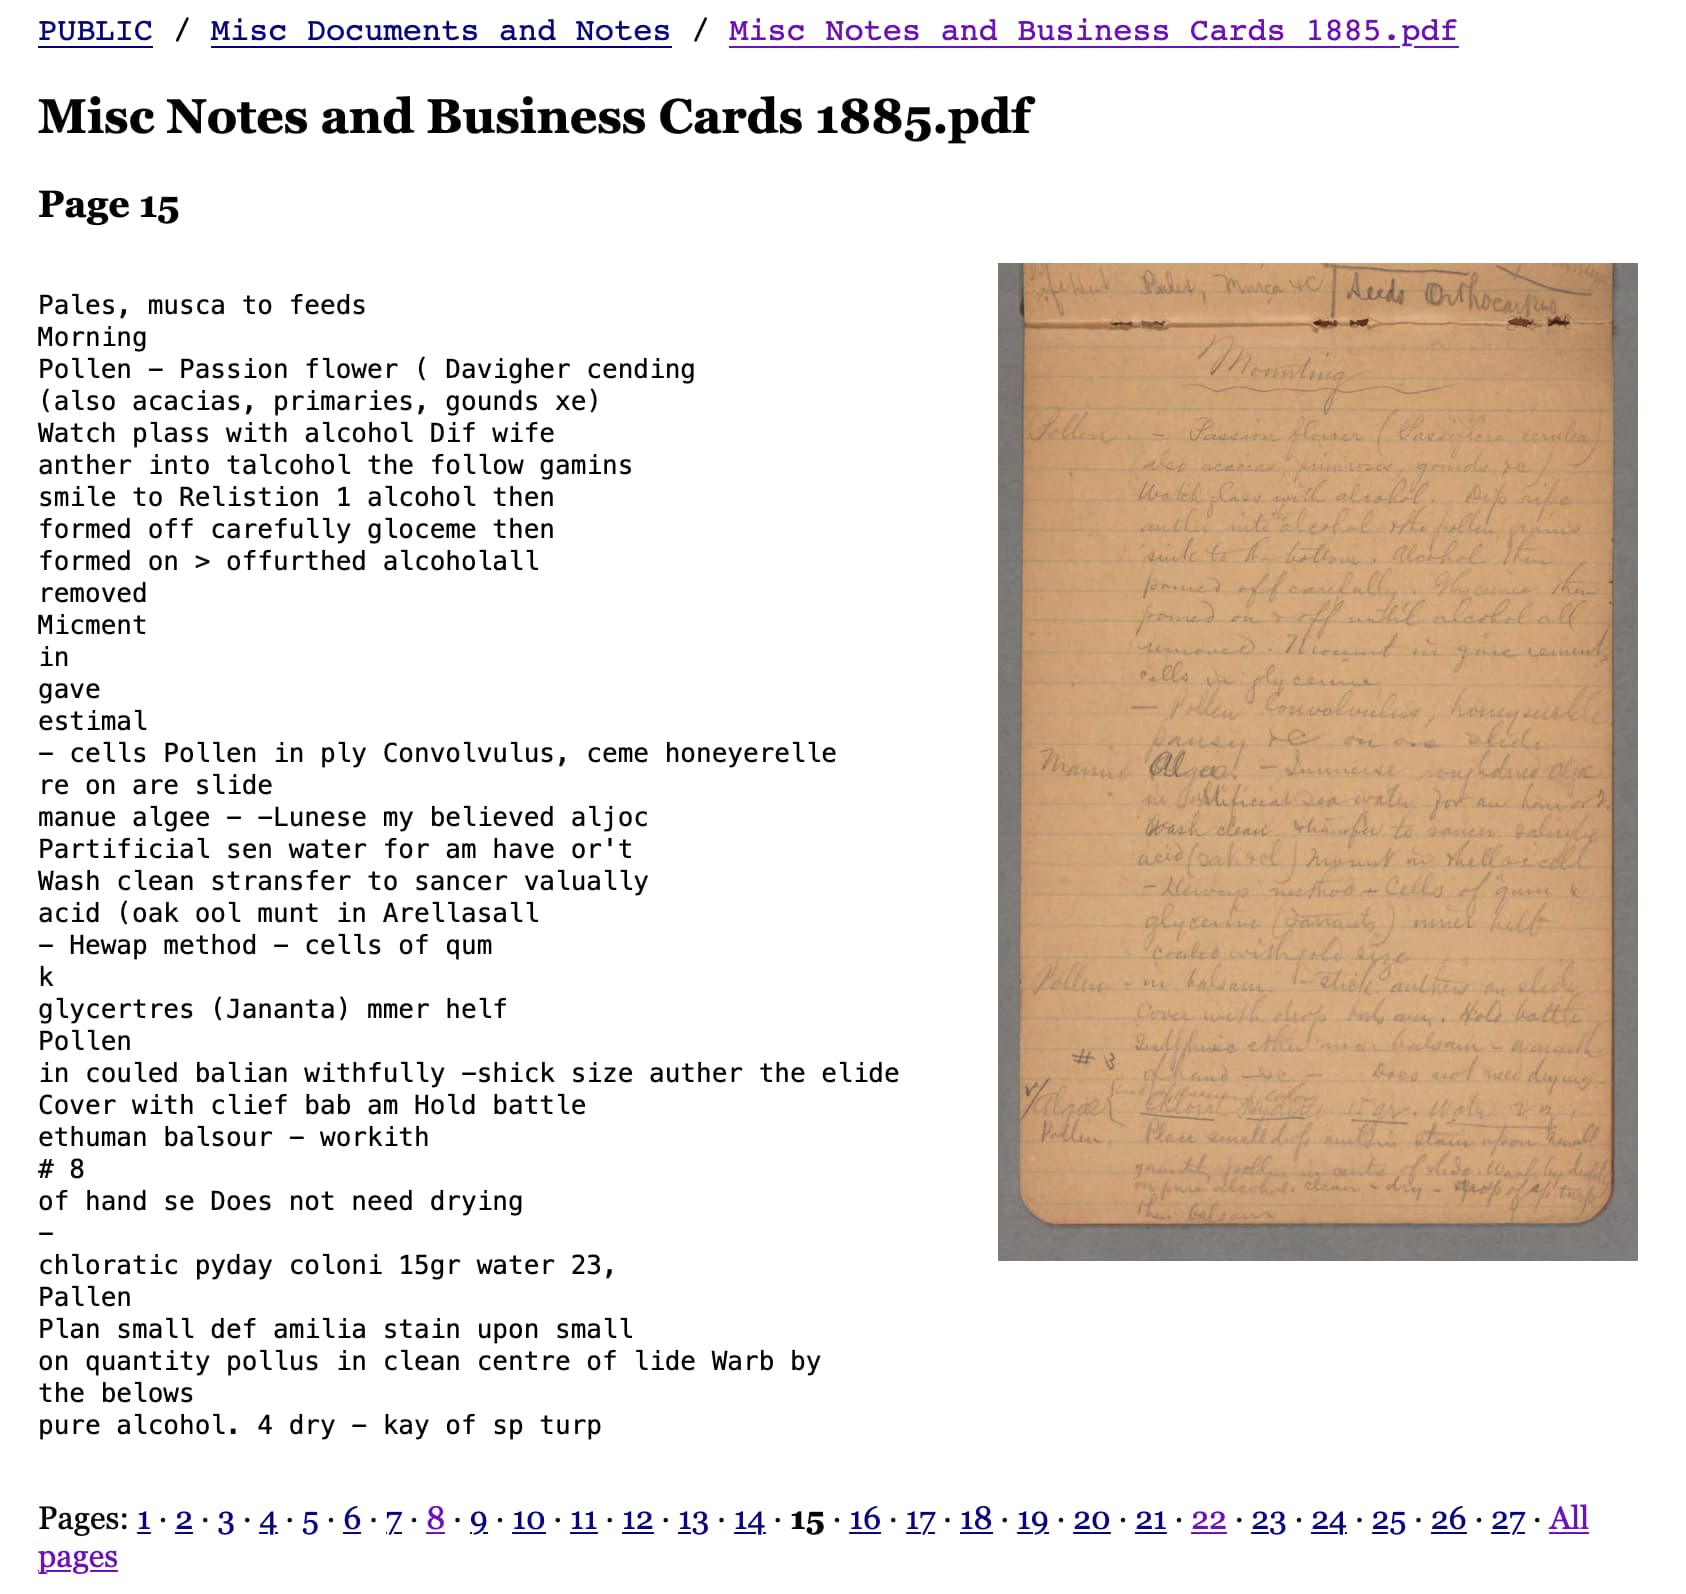 A page titled Misc Notes and Business Cards 1885.pdf pafe 15. The scanned image on the right shows some beautiful but very hard to read handwritten notes. The OCR text on the left looks to me like it's pretty accurate.